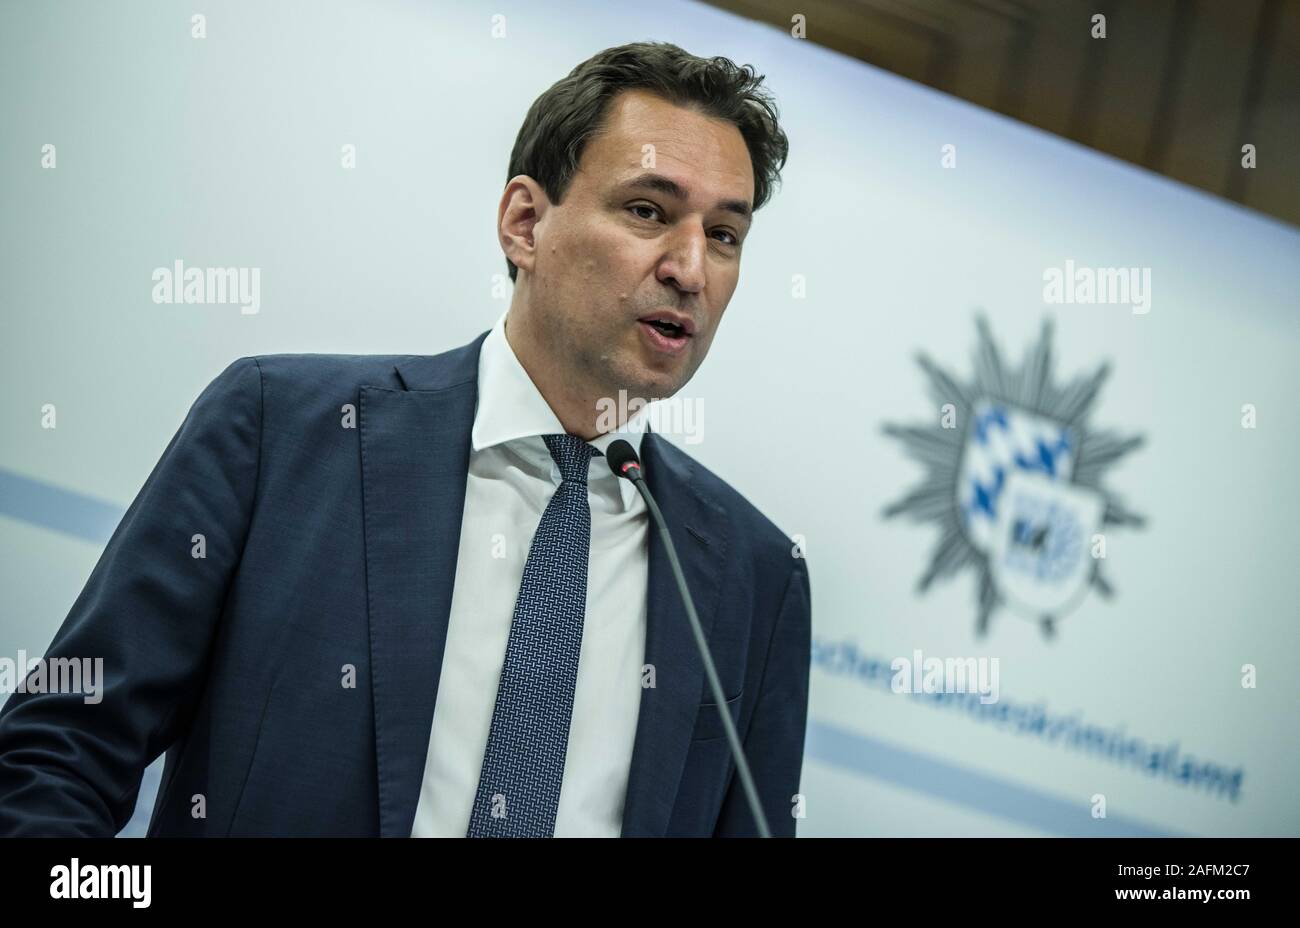 December 16, 2019, Munich, Bavaria, Germany: GEORG EISEINREICH, Justice Minister of Bavaria. Bavarian Interior Minister Joachim Herrmann, Justice Minister George Eisenreich, Bavarian Landeskriminalamt (Crime Office) preisdent Robert Heimberger, and Bavarian Attorney General Reinhard RÃ¶ttle (Reinhard Roettle) presented the results of the war on organized crime in Bavaria,  In 2018 alone, the damages to the state totaled some 169 million Euros, a staggering increase from 2017â€™s figure of 12 million.  Processes against organized crime have cost the state some 76 million Euros.  In addition to Stock Photo